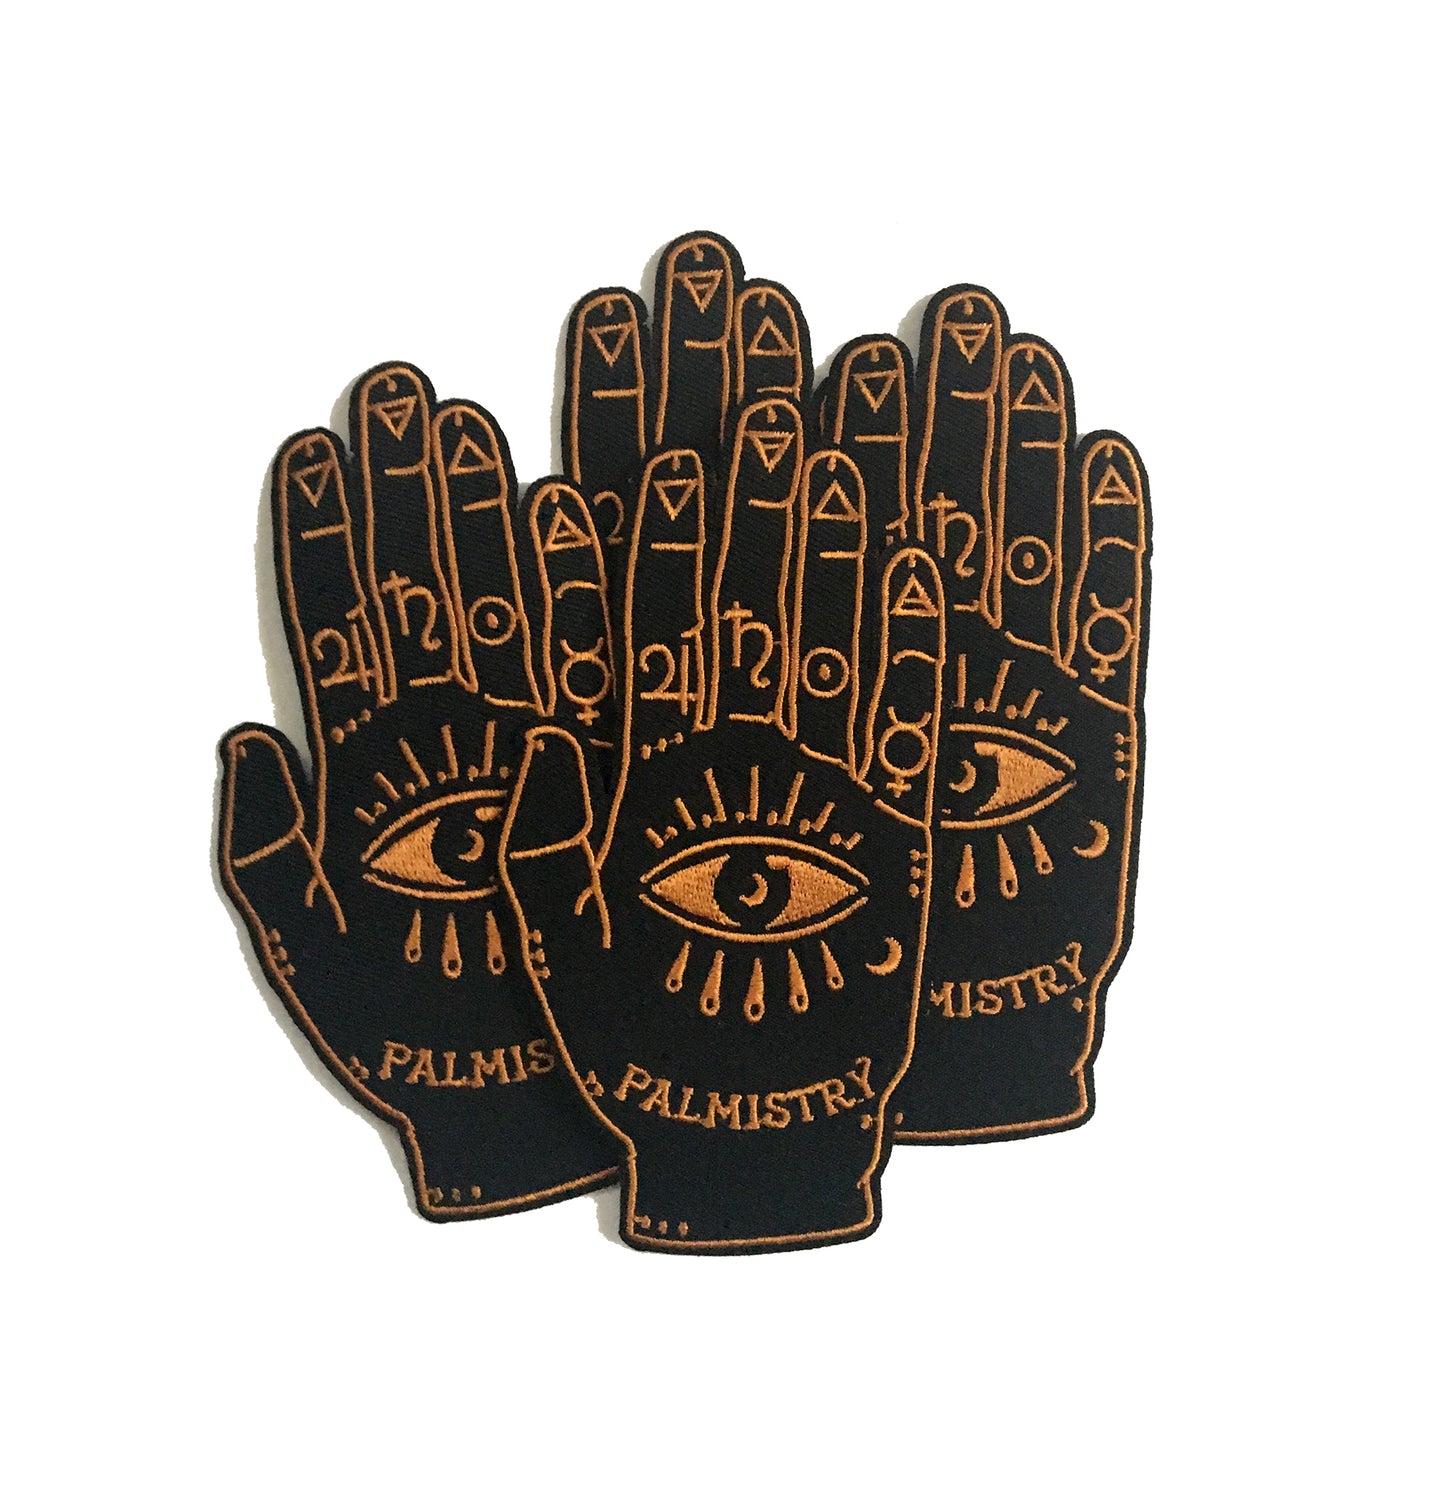 Palmistry Chiromancy Magical Embroidered Iron-on Patch